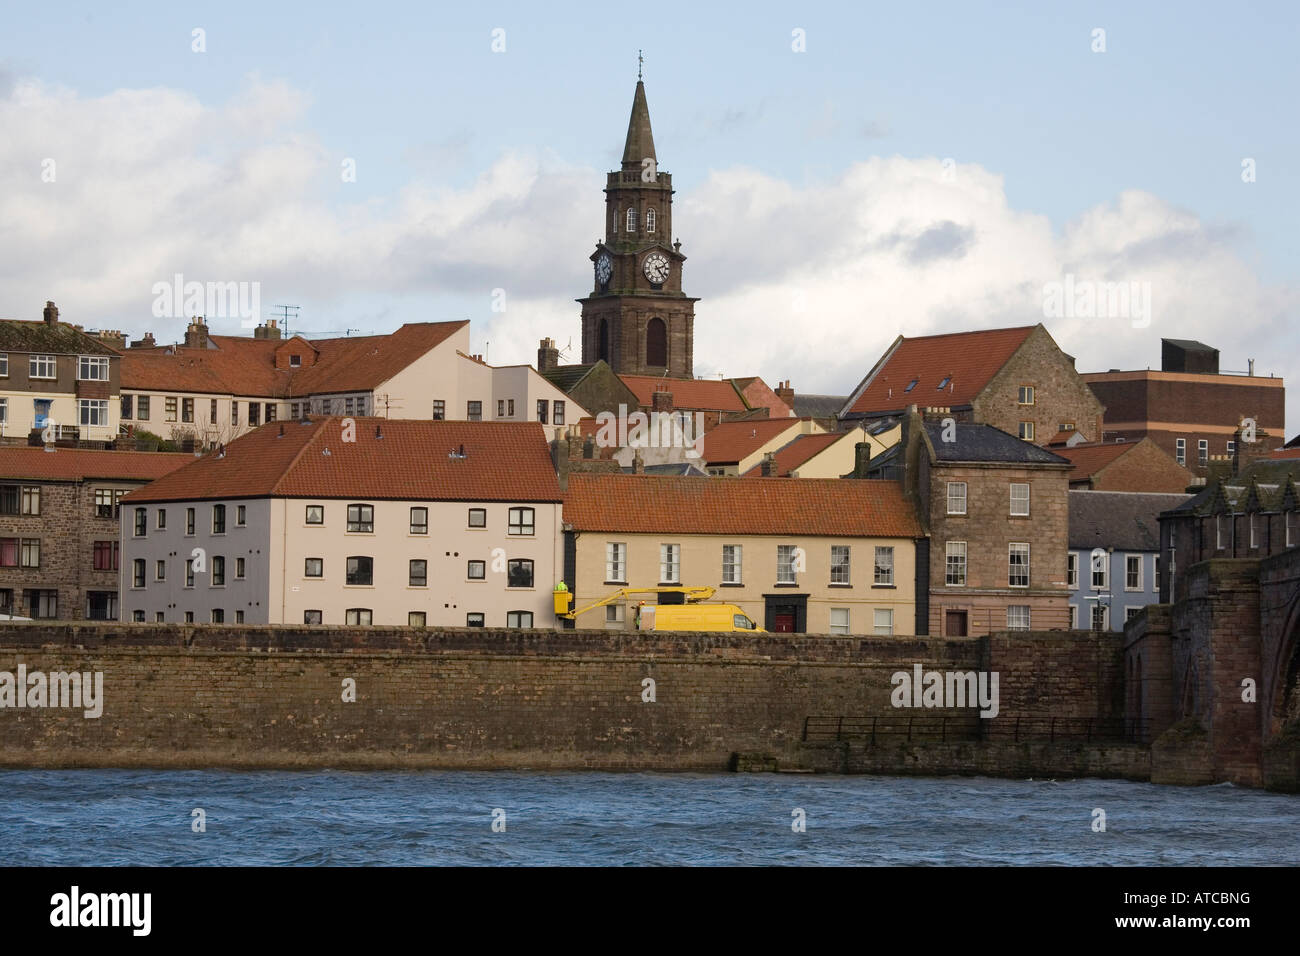 Welcome to Scotland   The town and river of Berwick on Tweed, UK Stock Photo